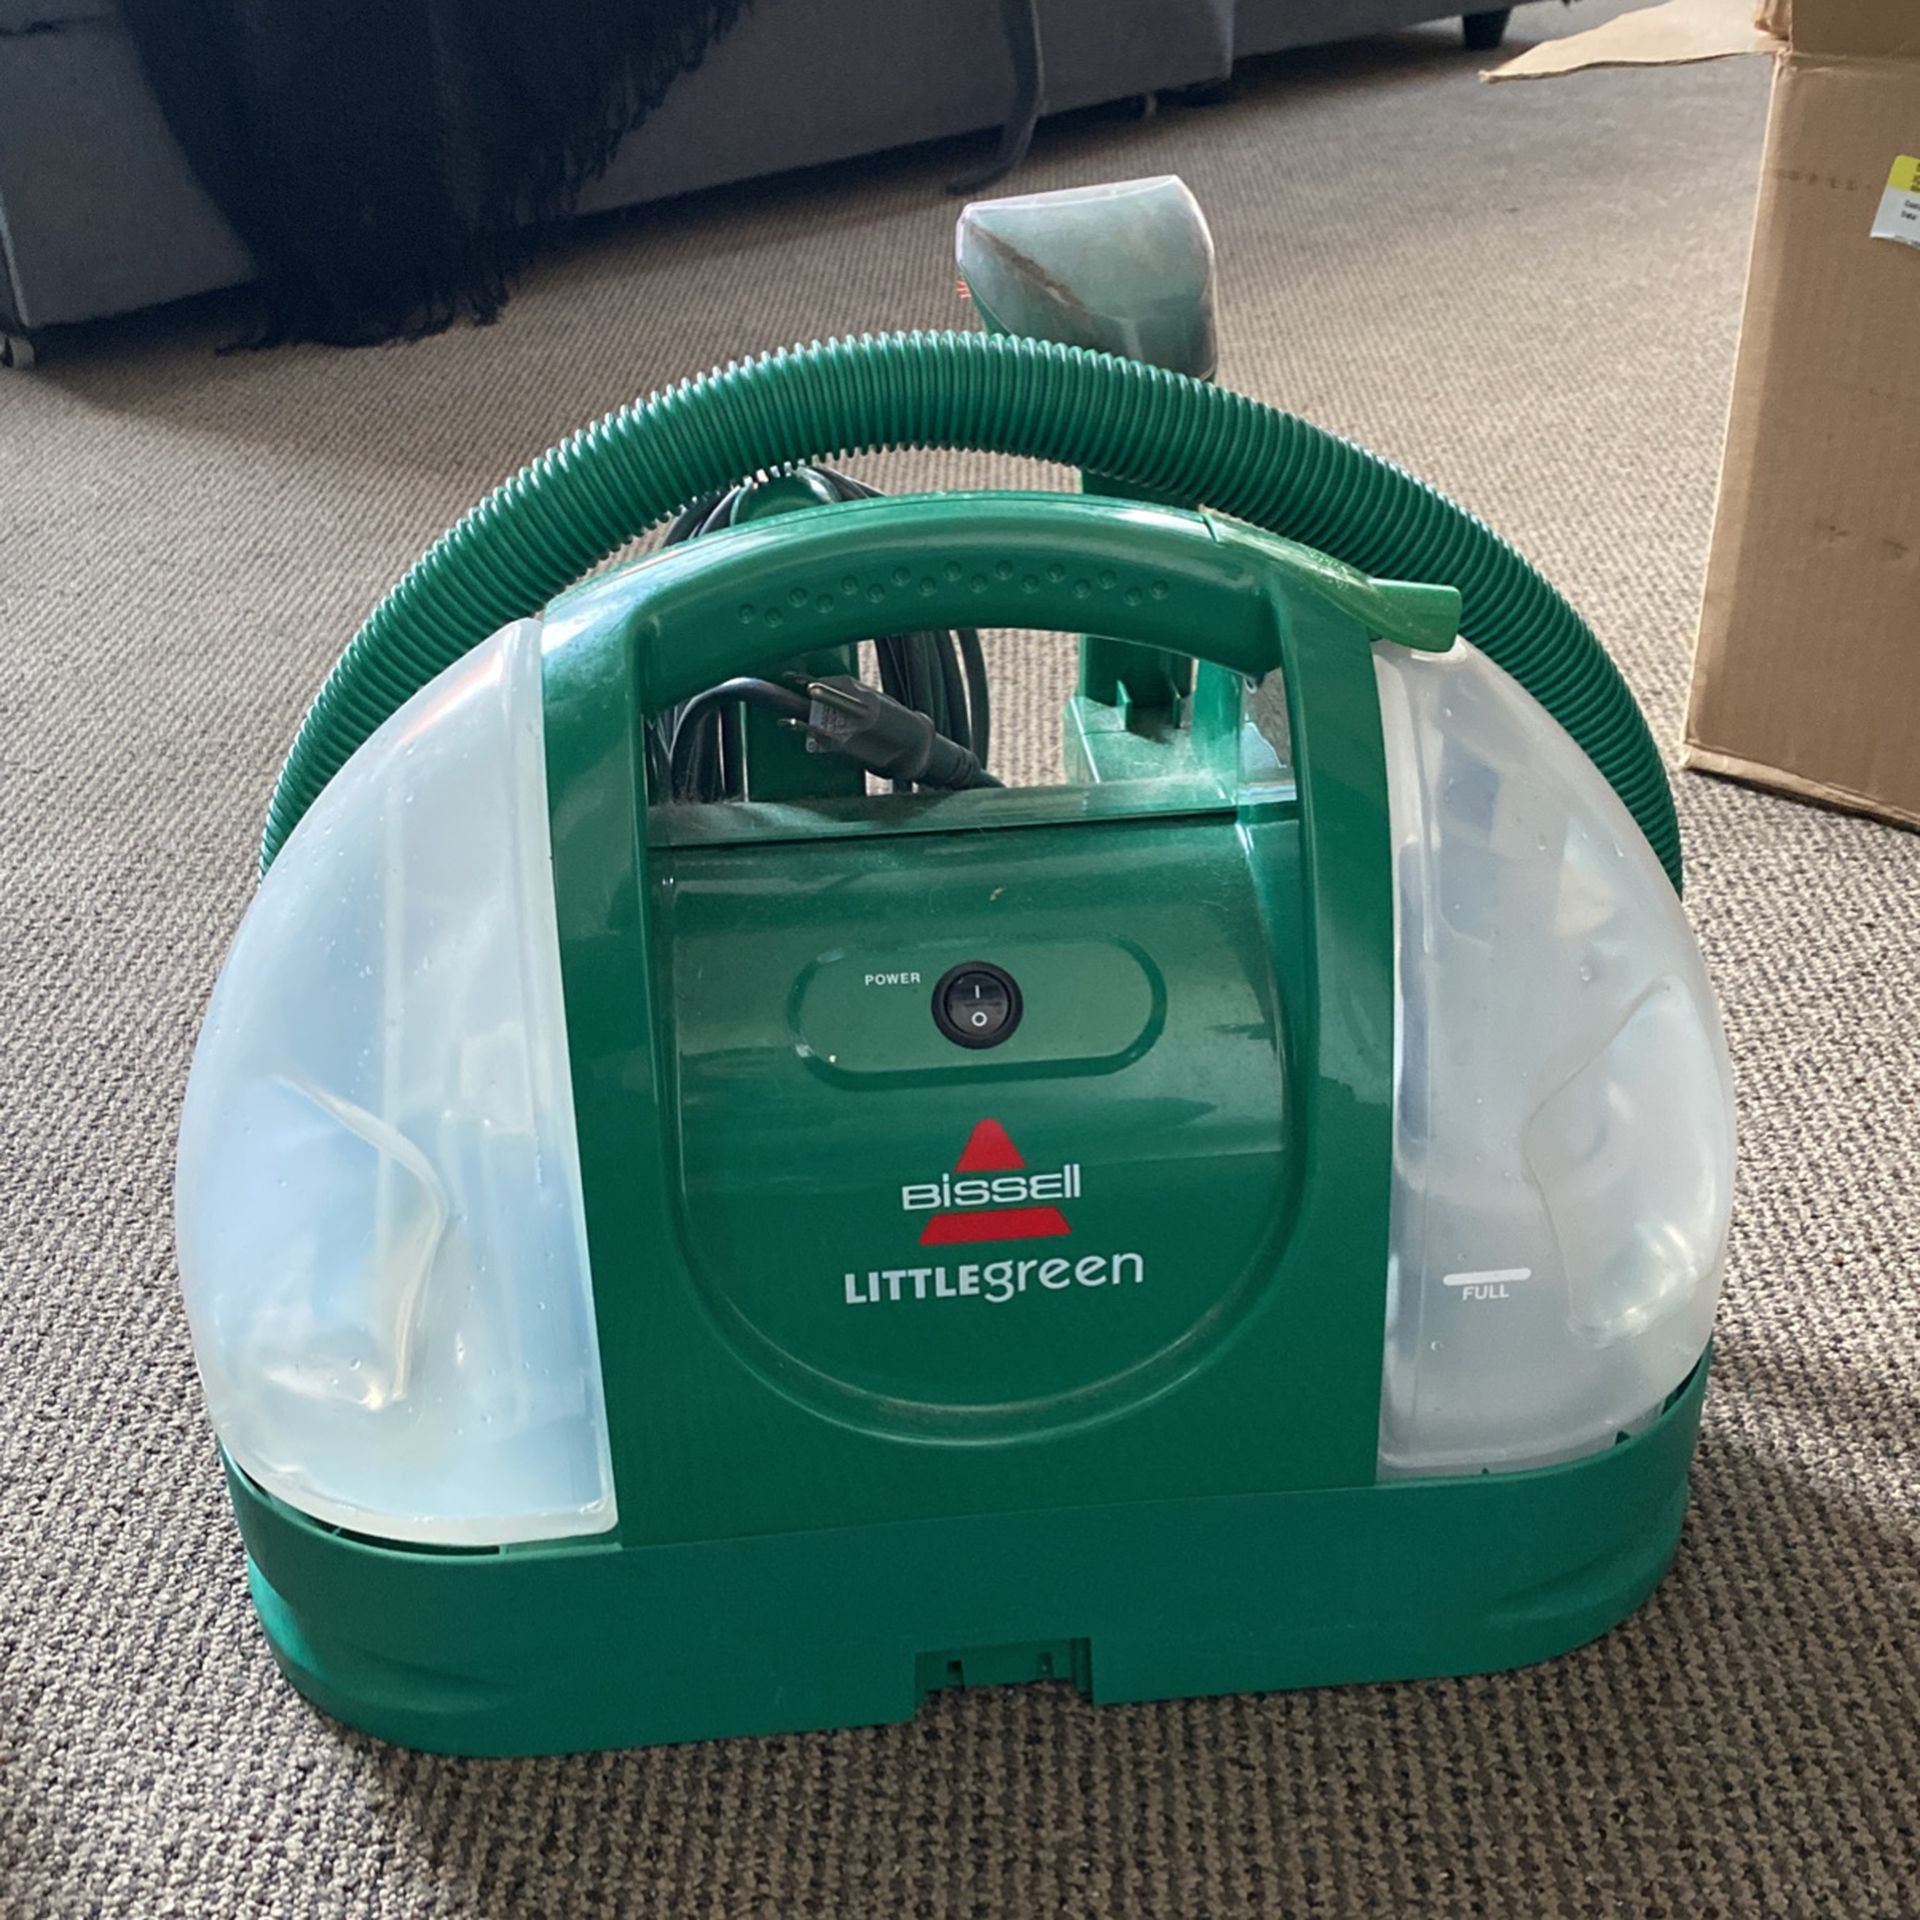 Bissell Little Green Portable Spot And Stain Cleaner